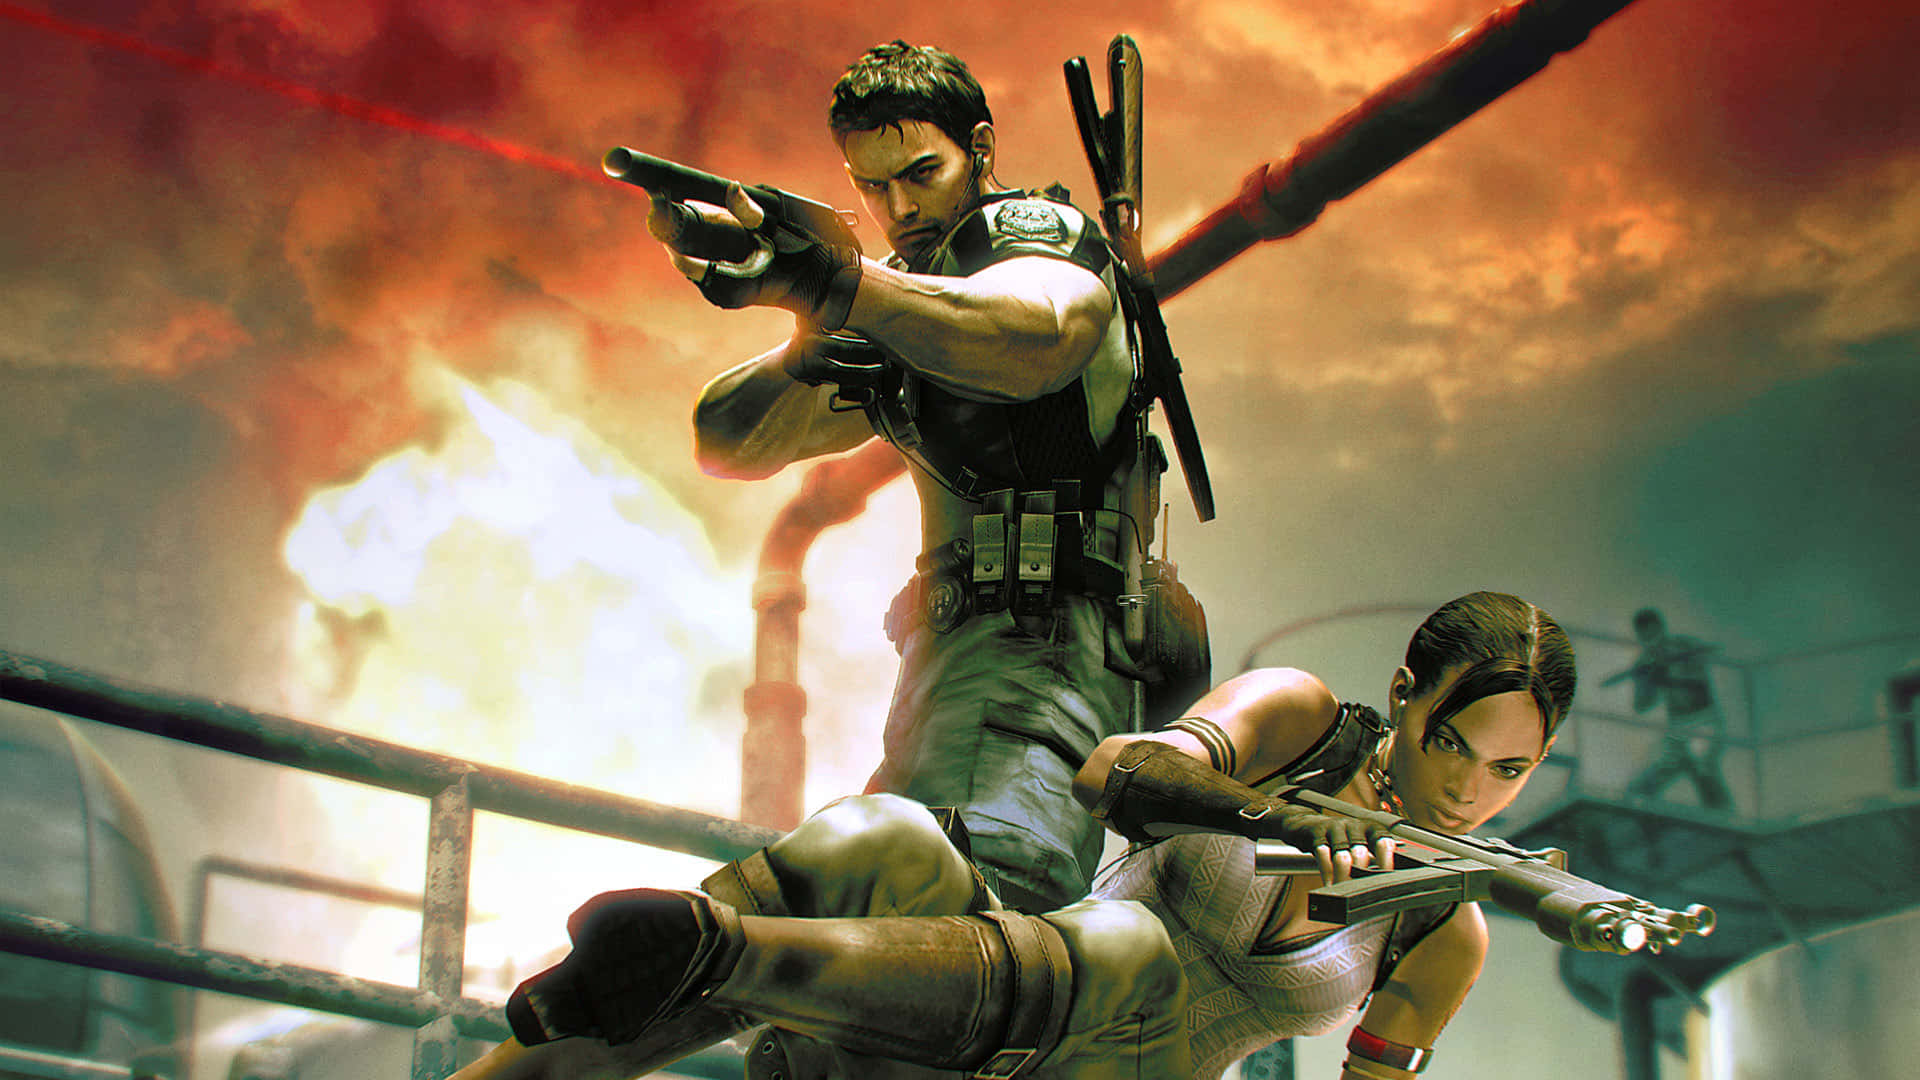 The Iconic Resident Evil Characters In Action Wallpaper